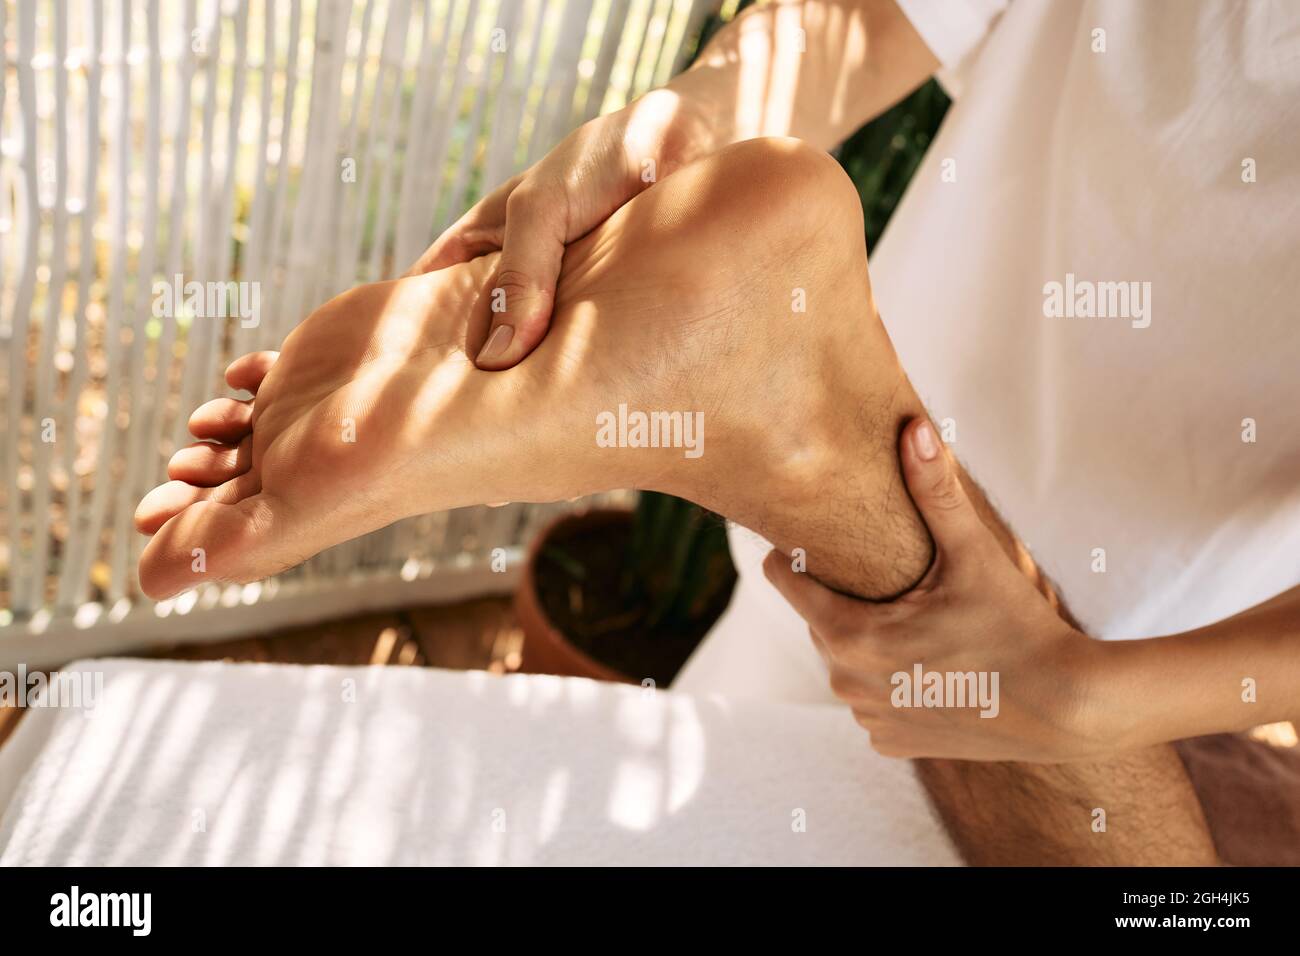 Foot massage with massage oil for man while relaxing and resting at spa on vacation Stock Photo